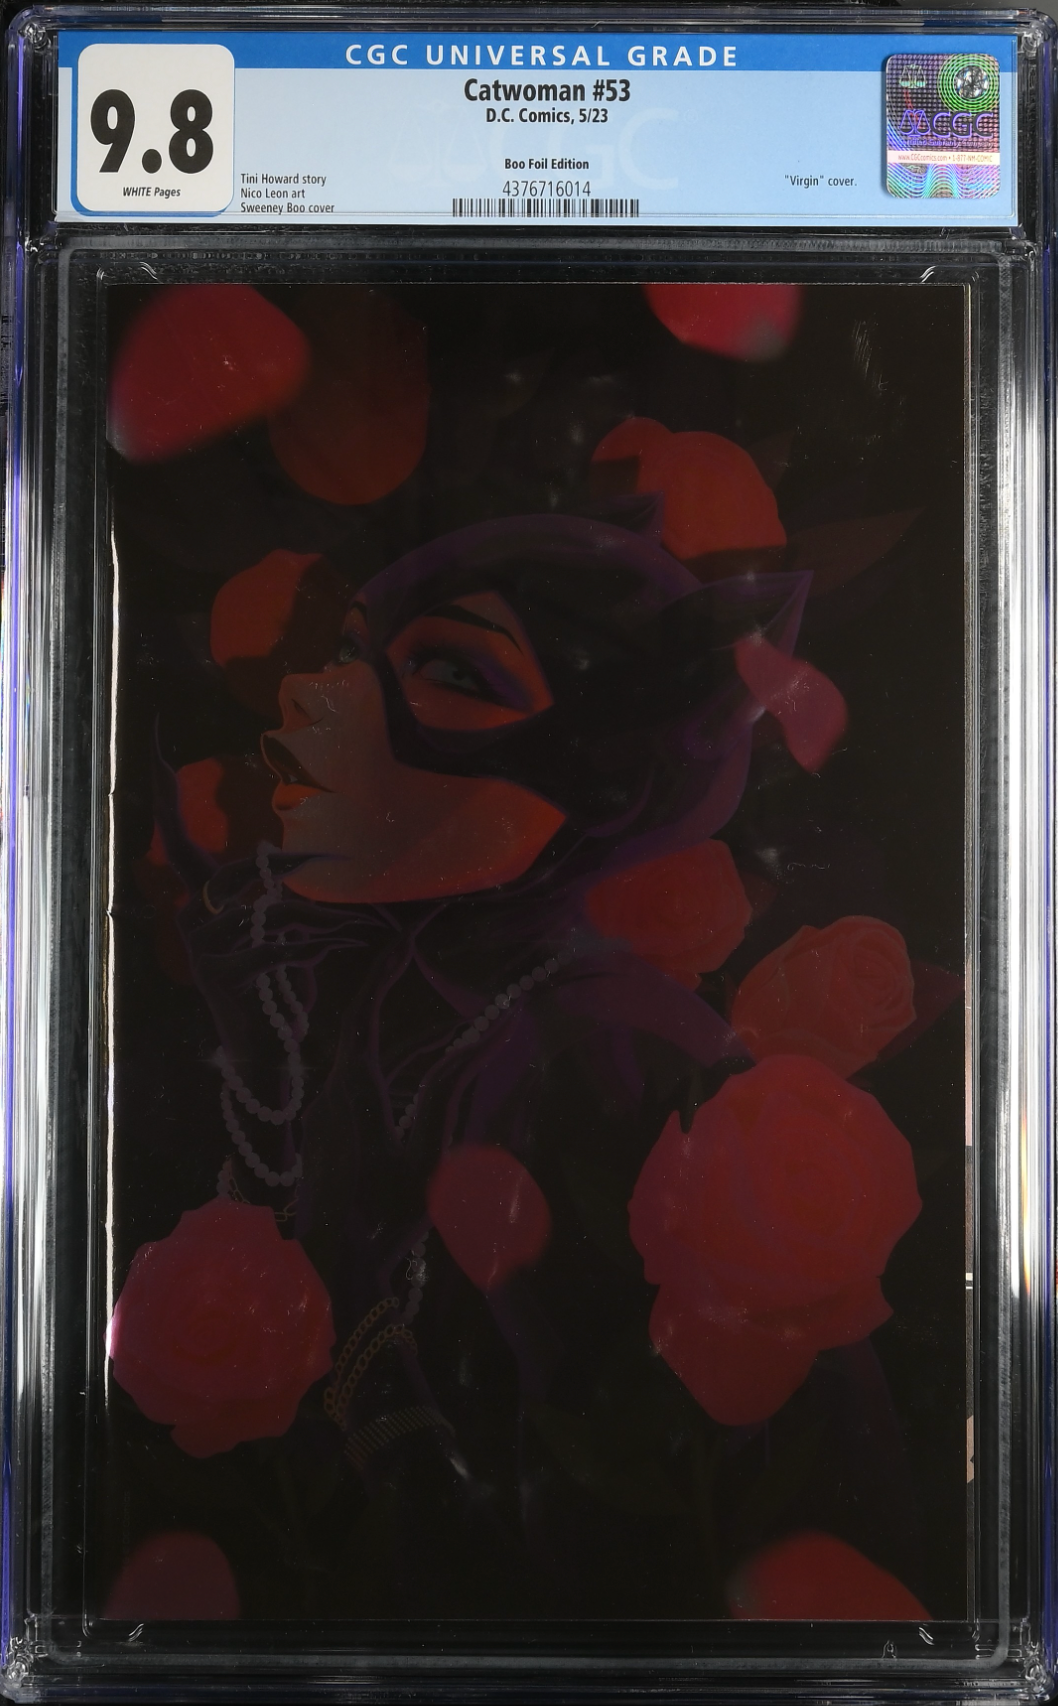 Catwoman #53 Boo 1:50 Foil Retailer Incentive Variant CGC 9.8